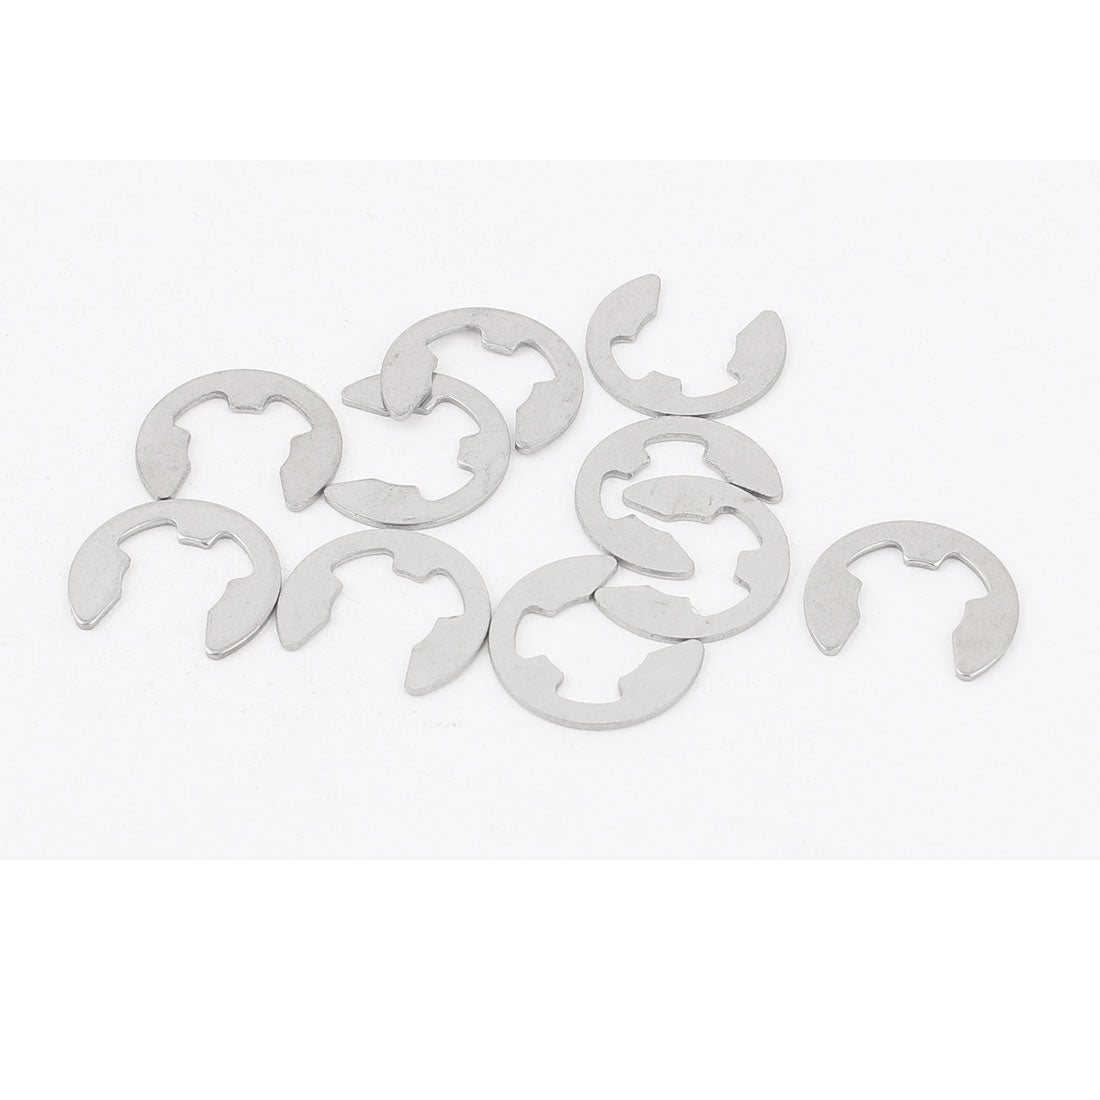 uxcell Uxcell 10pcs 304 Stainless Steel Fastener External Retaining Ring E-Clip Circlip 10mm